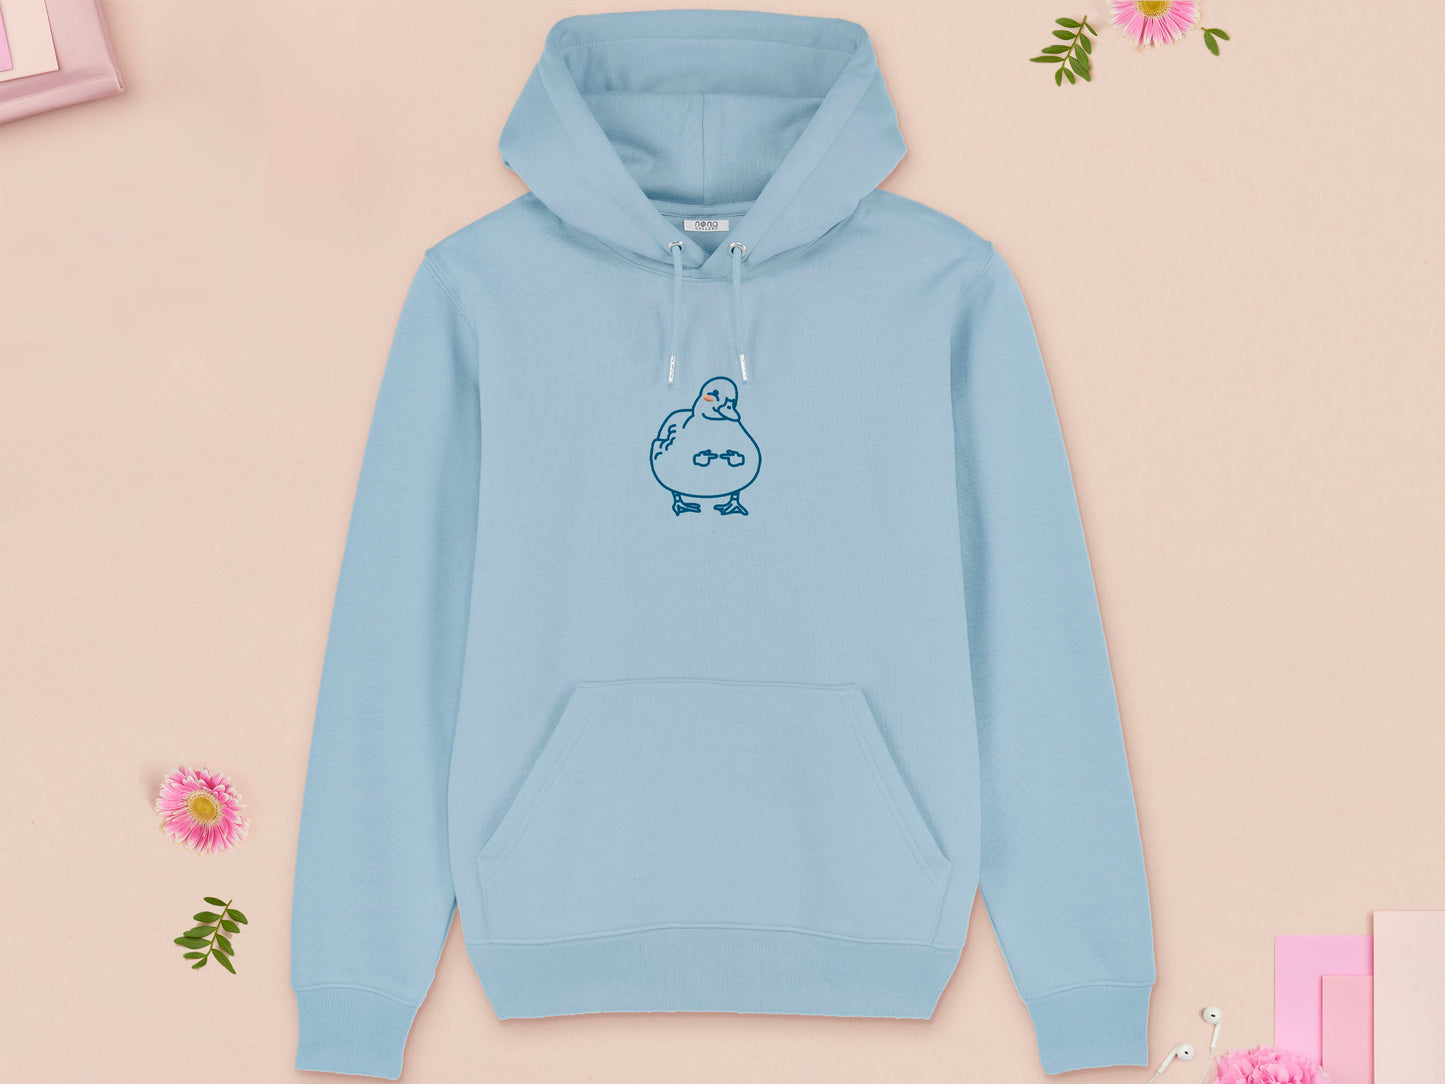 A blue long sleeve fleece hoodie, with an embroidered blue thread design of cute blushing duck with the for me finger hand emoji symbols